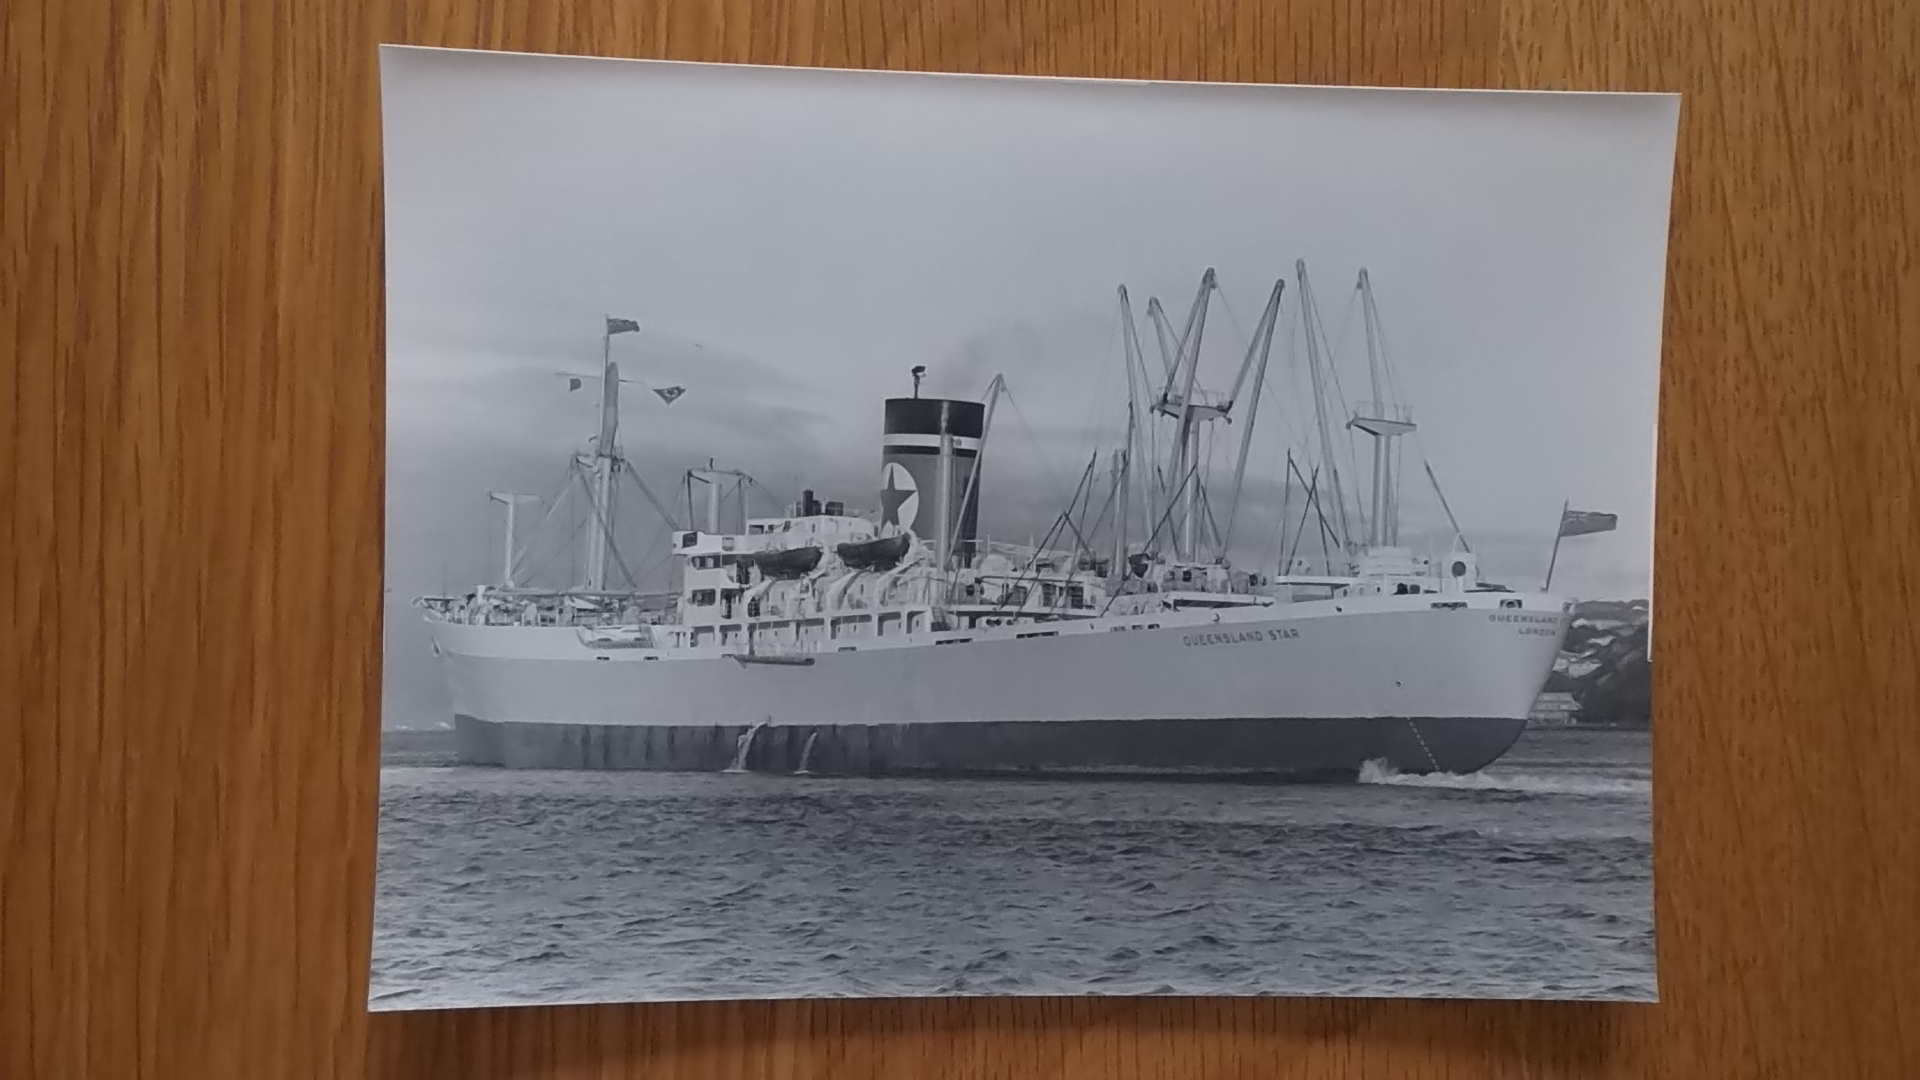 B/W PHOTOGRAPH OF THE VESSEL QUEENSLAND STAR TAKEN EARLY ON IN HER HISTORY